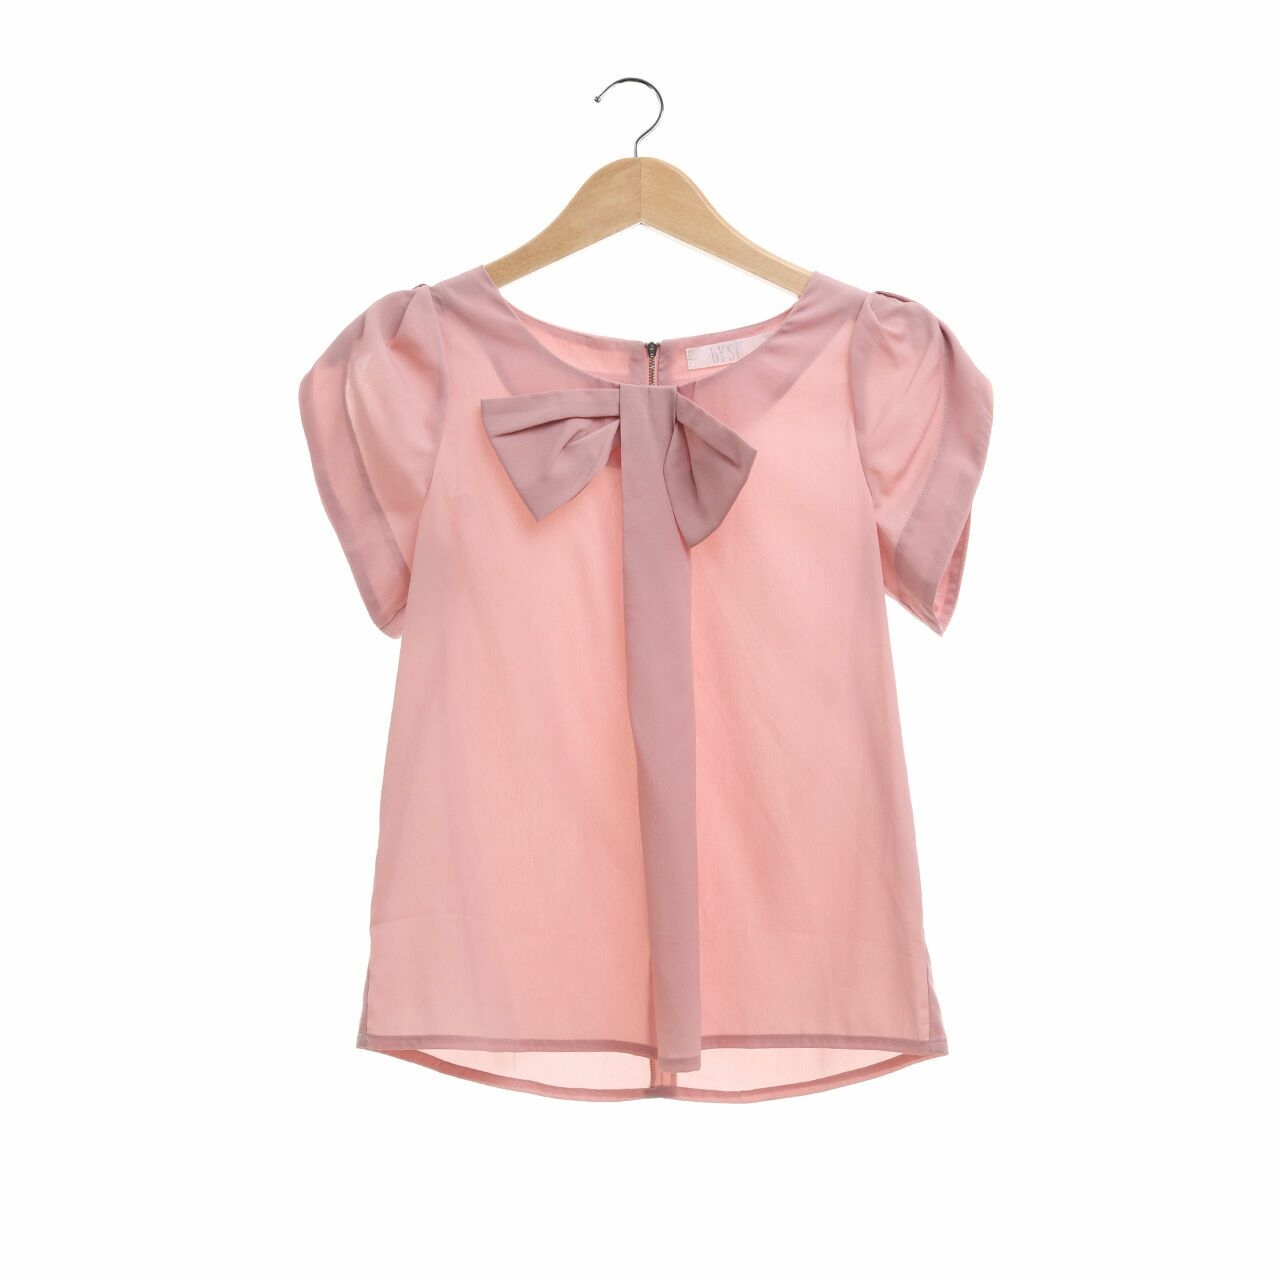 bYSI Pink Blouse